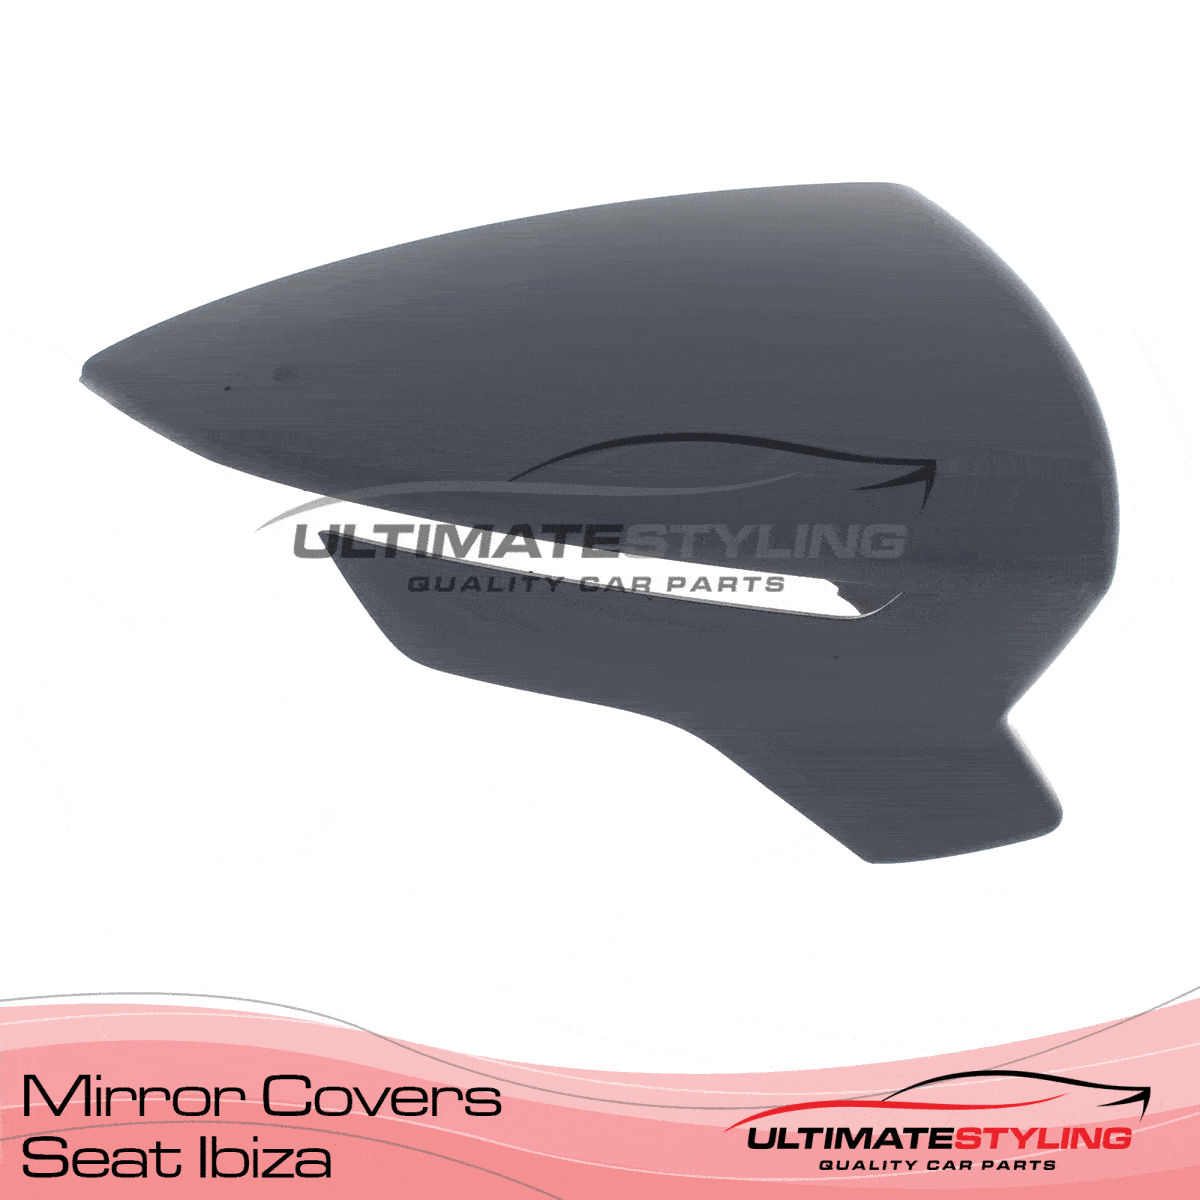 360 degree view of a Seat Ibiza wing mirror cover